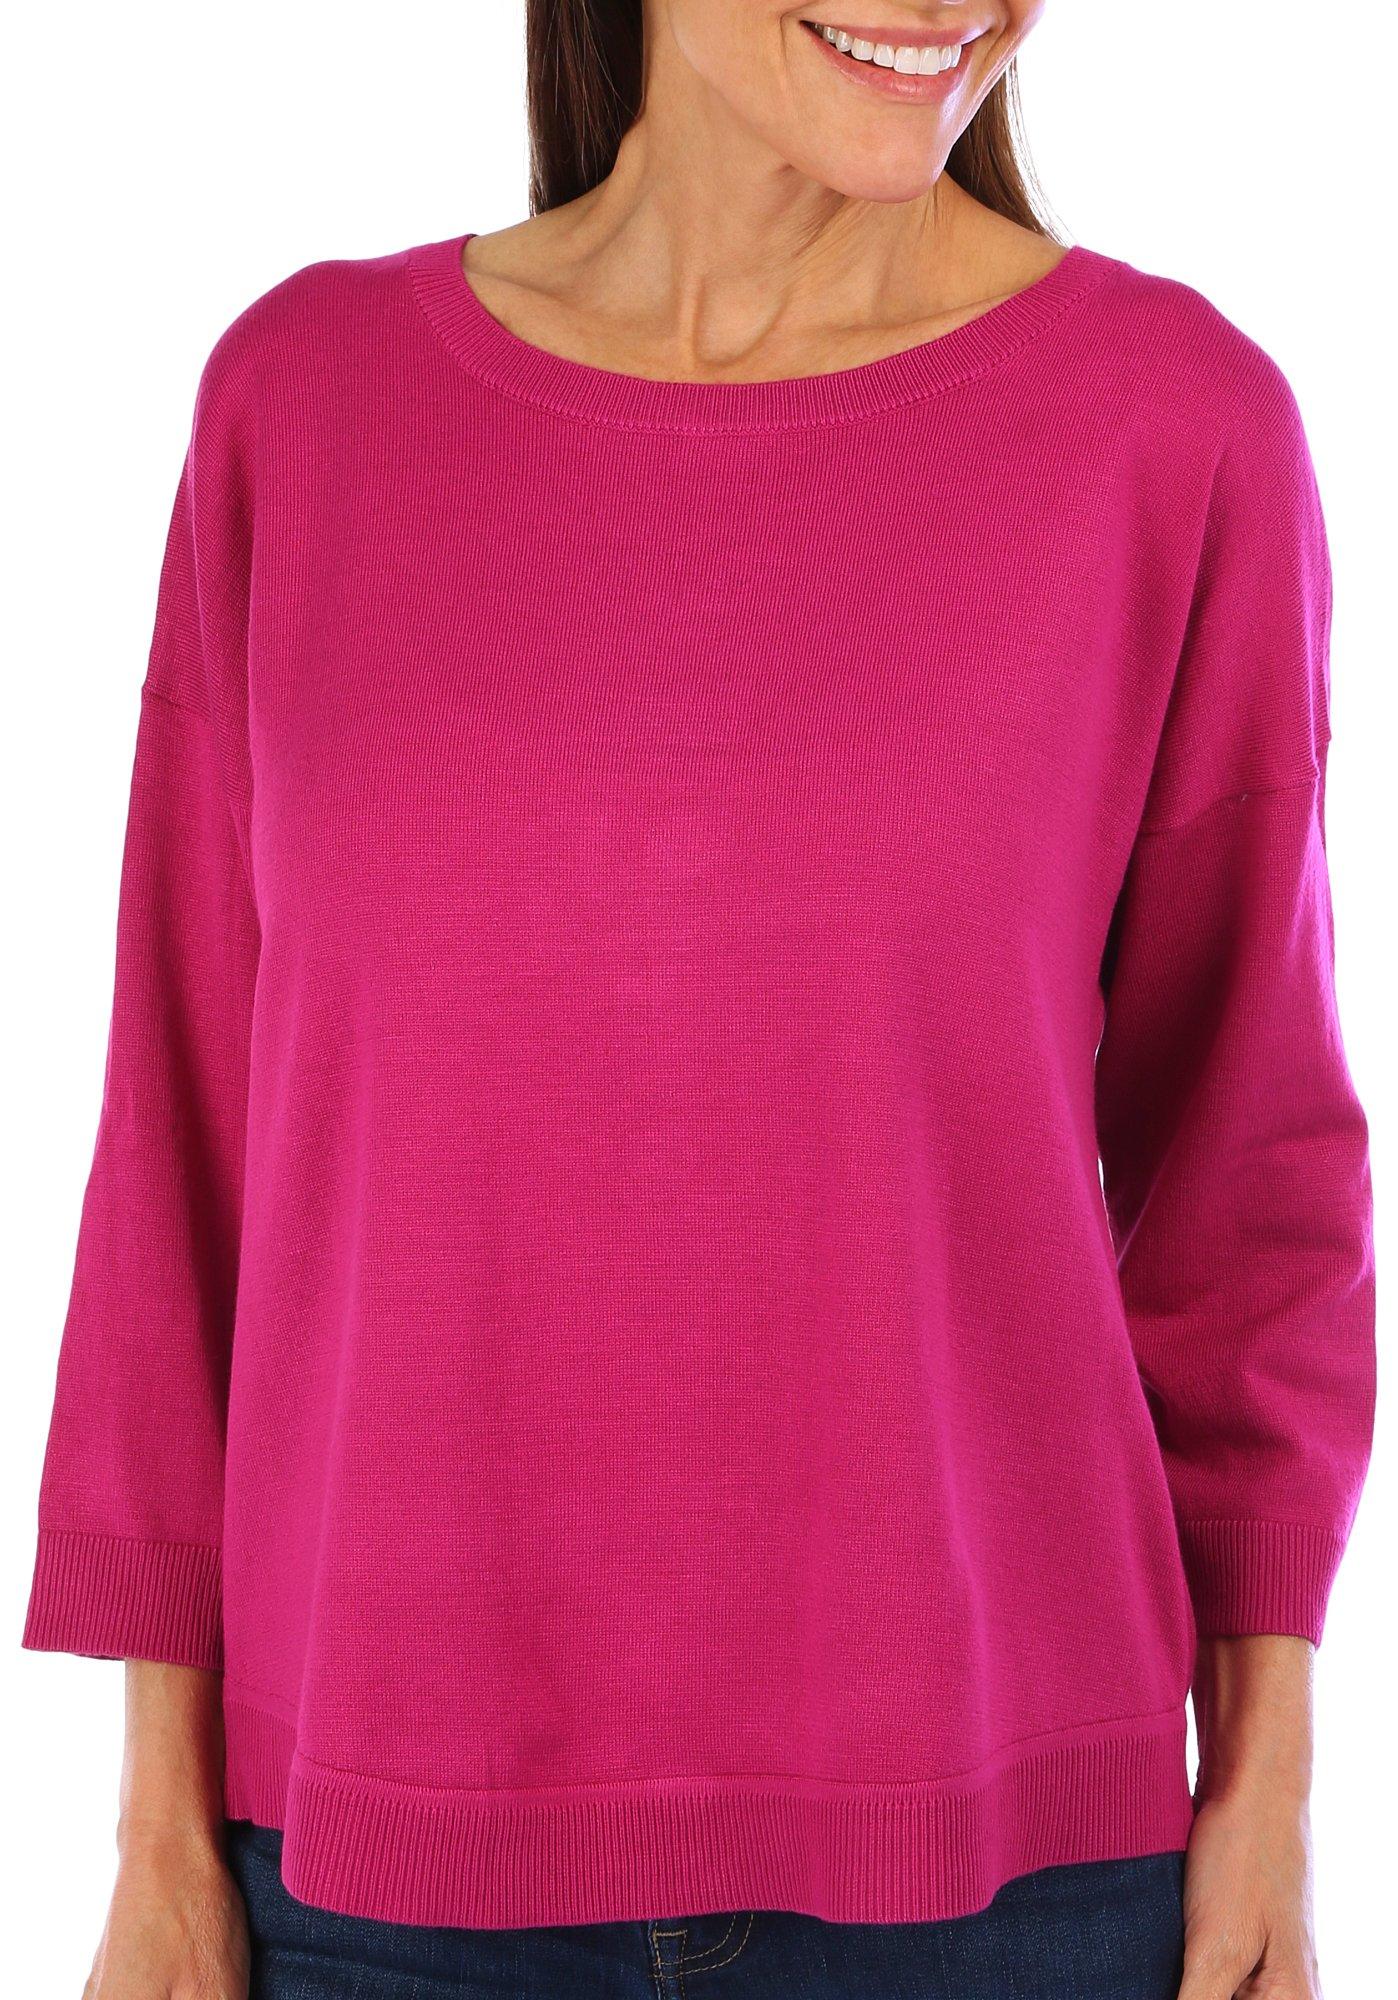 Womens 3/4 Sleeve Button Back Sweater